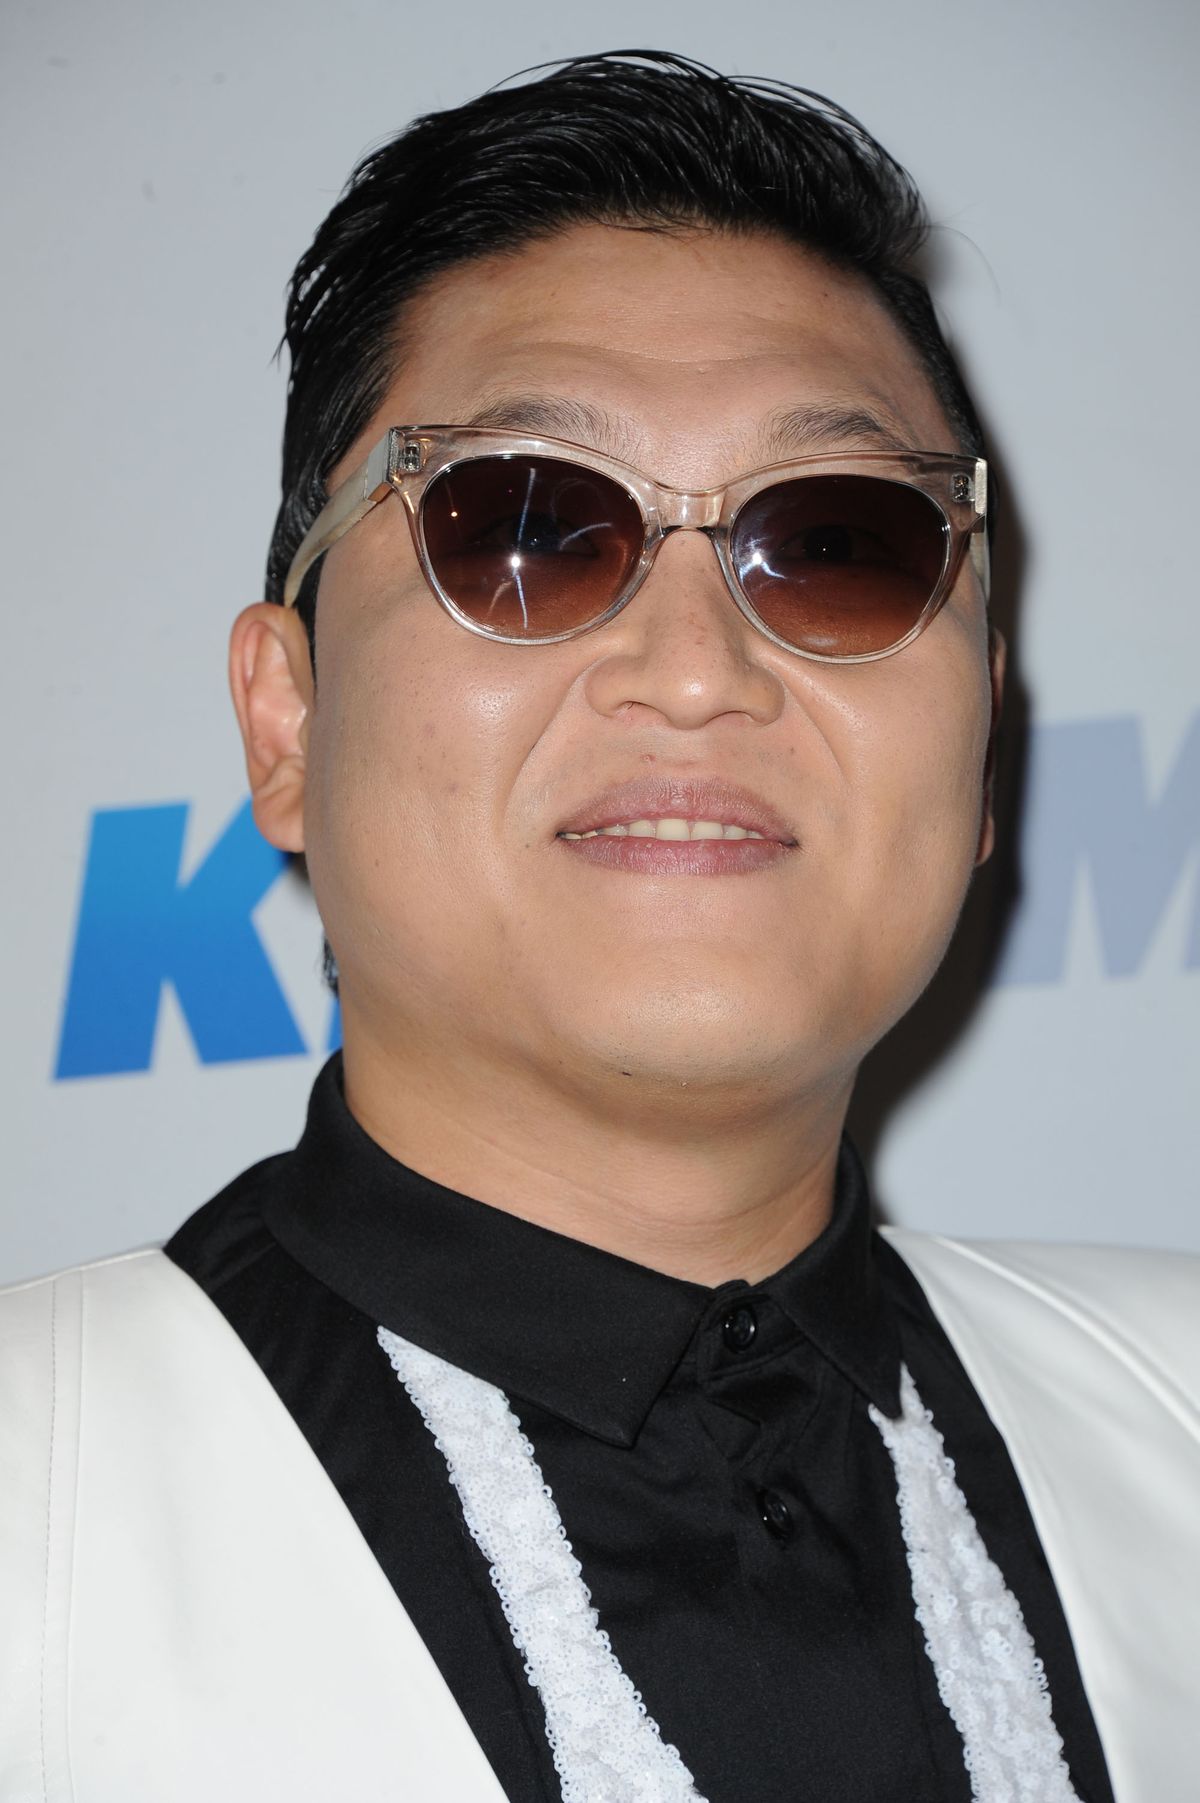 FILE - In this Monday, Dec. 3, 2012 file photo, PSY arrives at KIIS FM